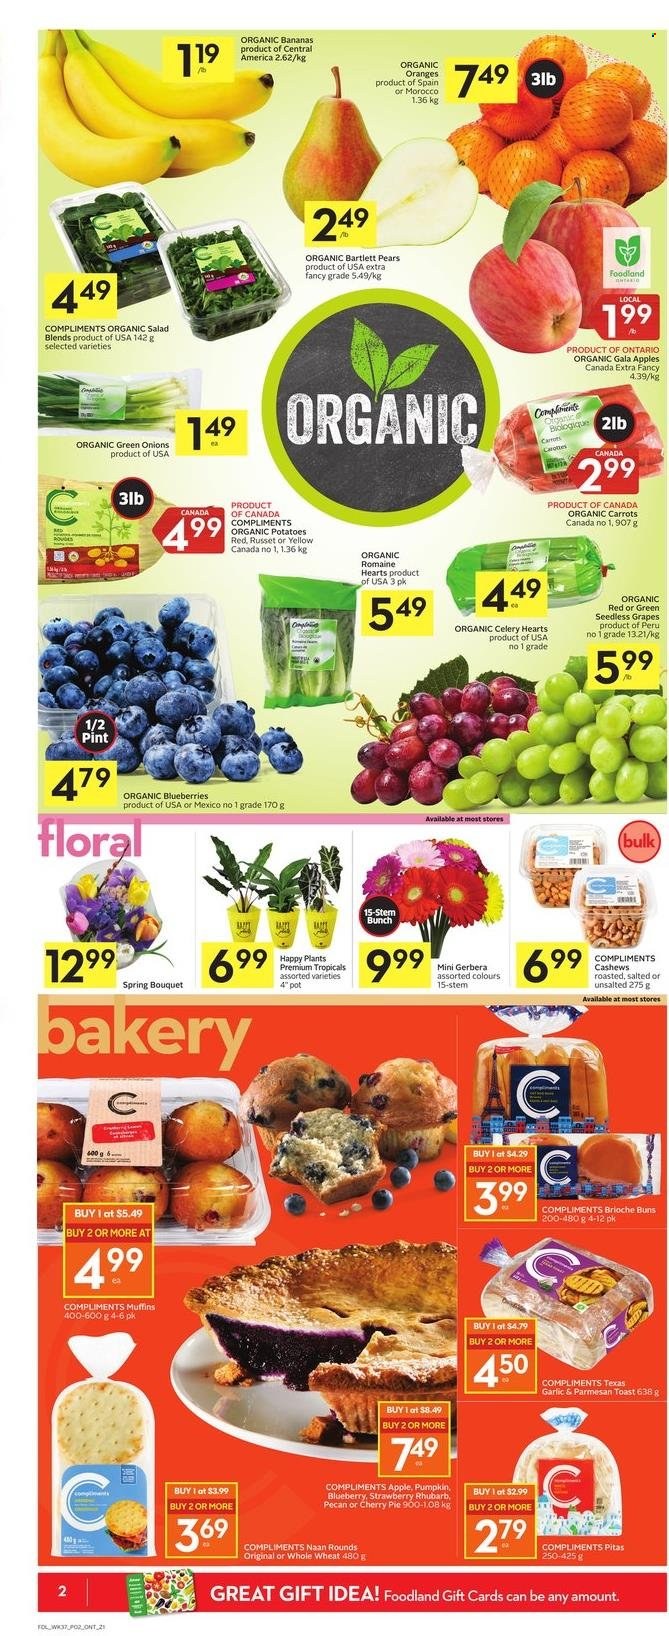 thumbnail - Foodland Flyer - January 06, 2022 - January 12, 2022 - Sales products - pita, pie, buns, brioche, muffin, cherry pie, carrots, celery, russet potatoes, potatoes, salad, green onion, sleeved celery, apples, bananas, Bartlett pears, Gala, grapes, seedless grapes, pears, organic bananas, parmesan, cashews, oranges. Page 4.